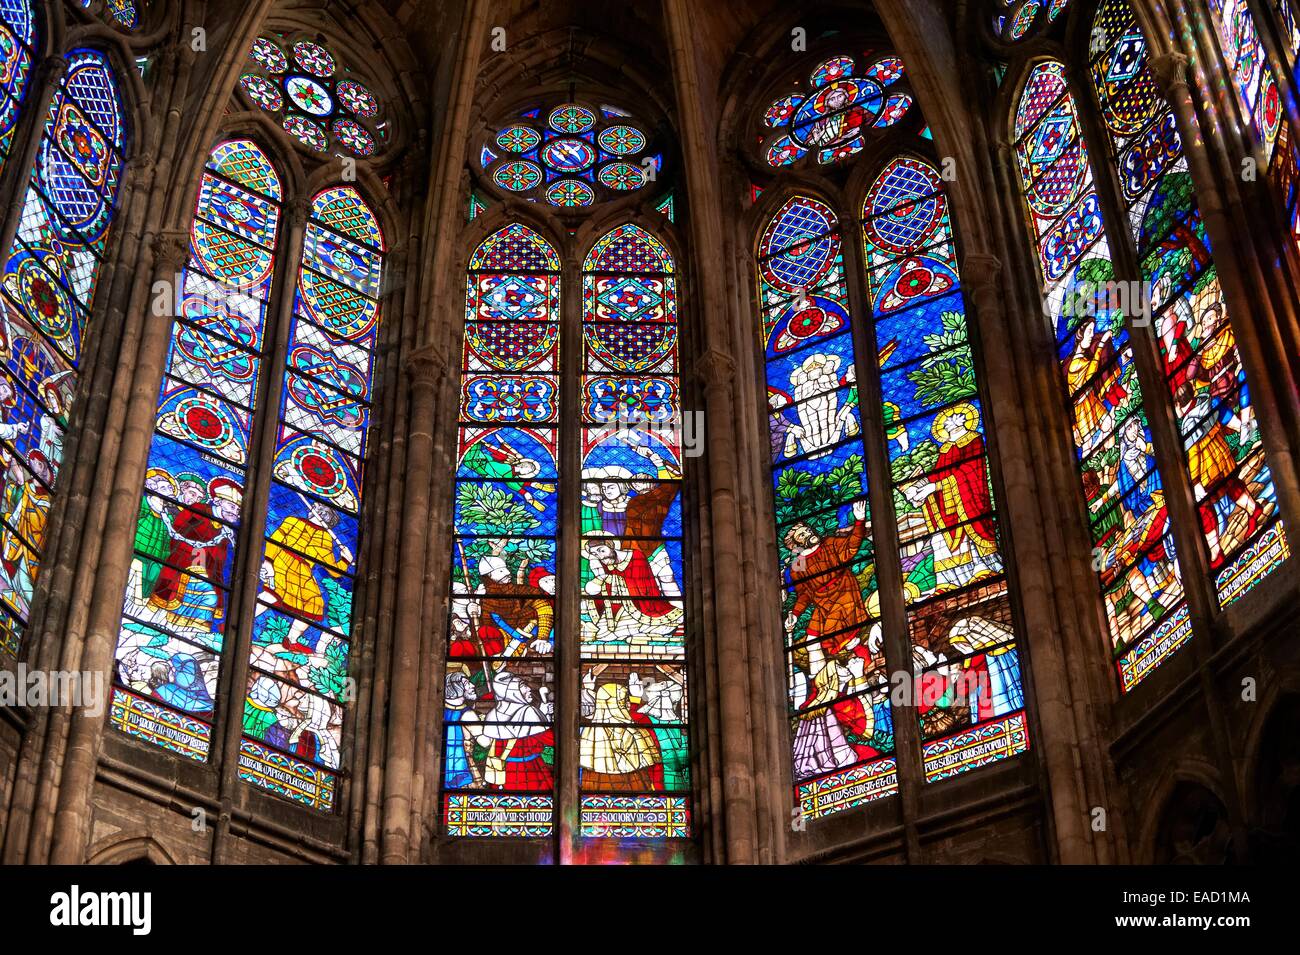 Medieval Gothic stained glass window showing scenes from the Martyrdom of Saint Denis, Cathedral Basilica of Saint Denis Stock Photo